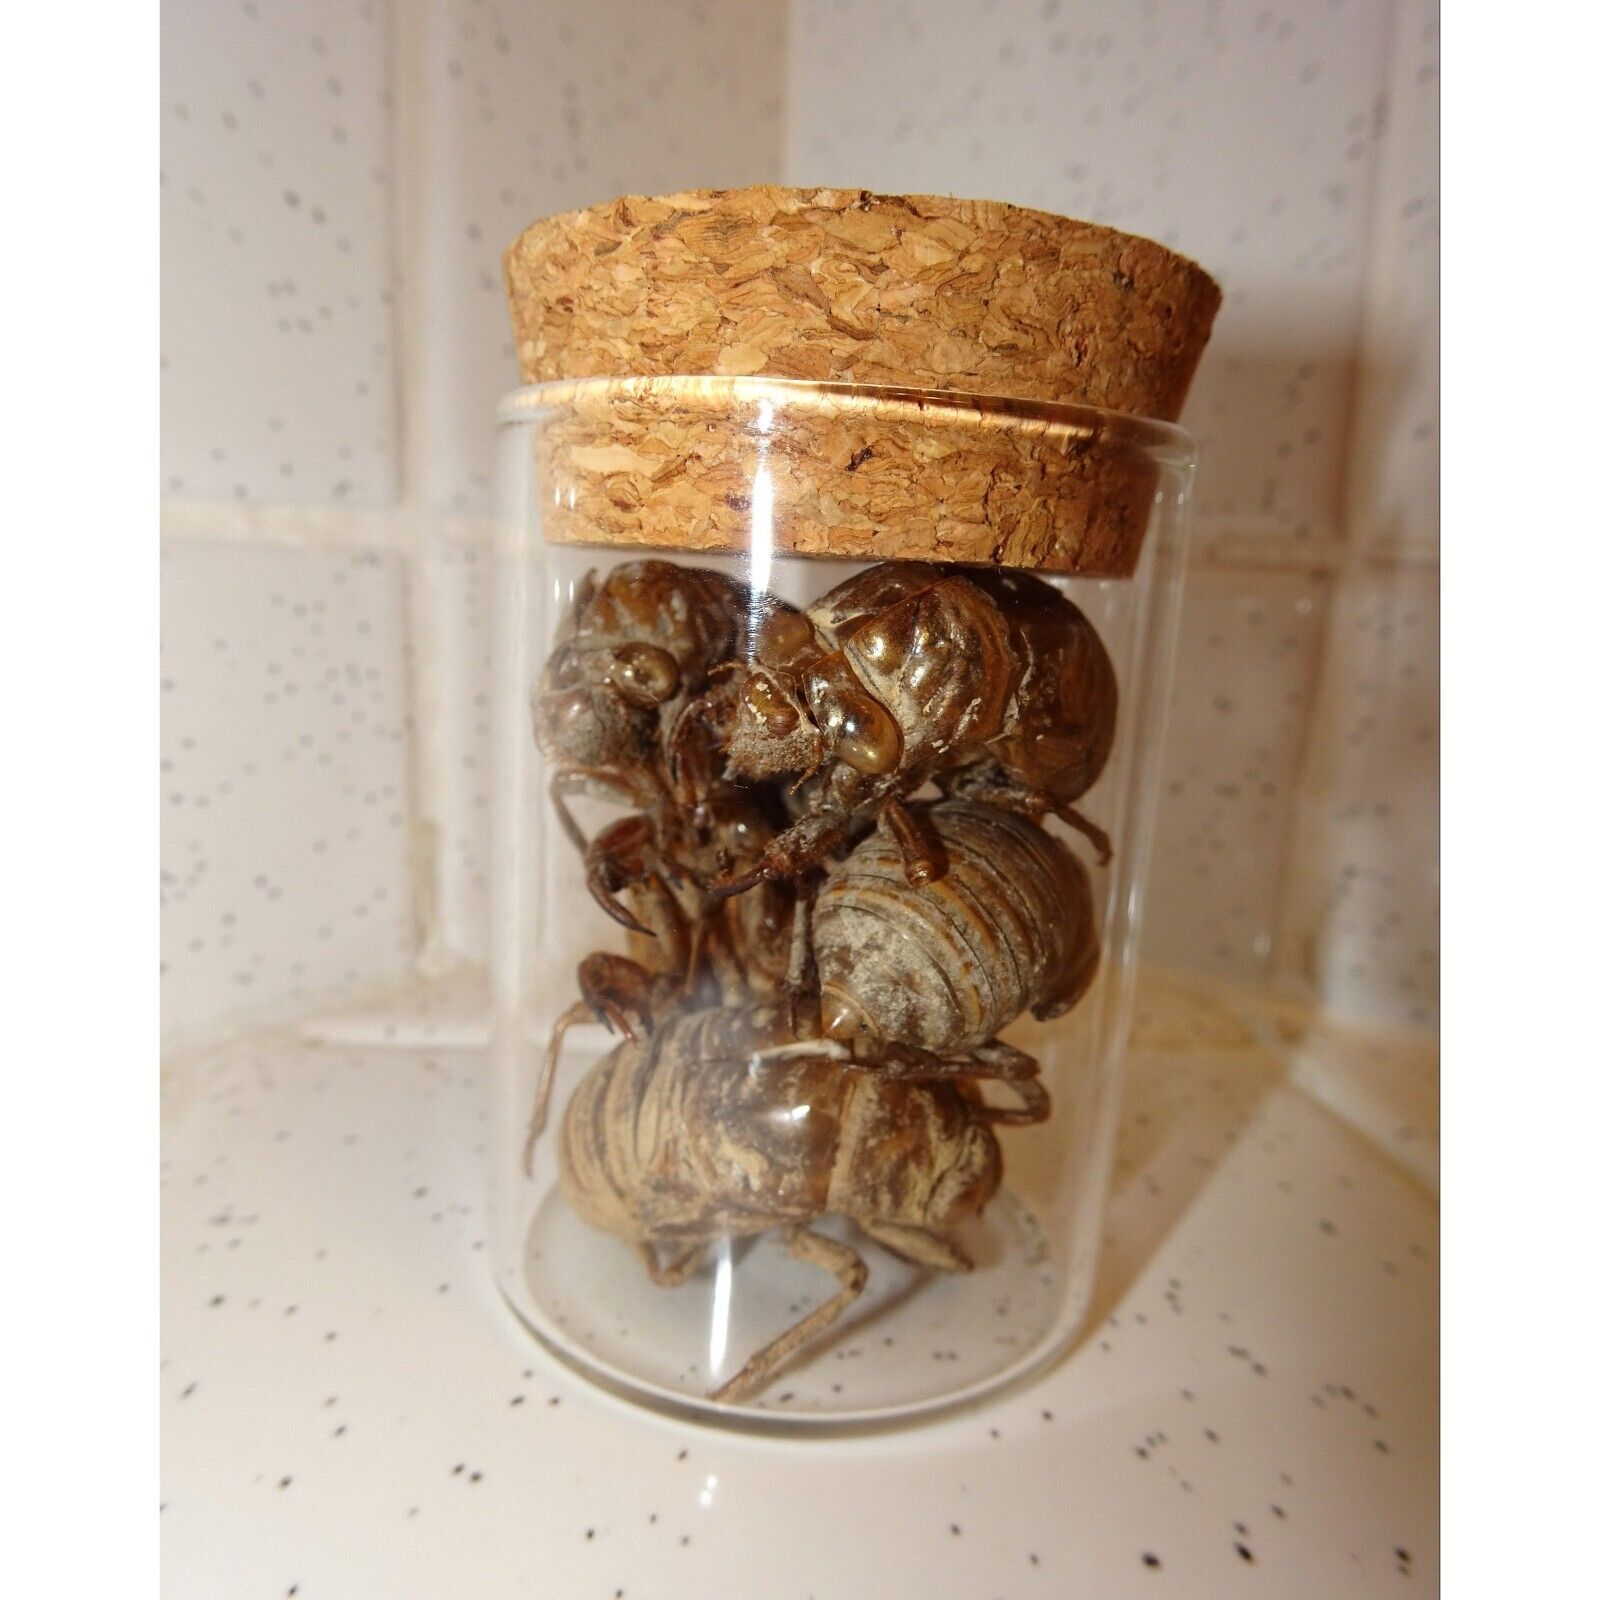 Glass Jar of Large Cicada Skins oddity curiosity nature enthusiasts insect molt